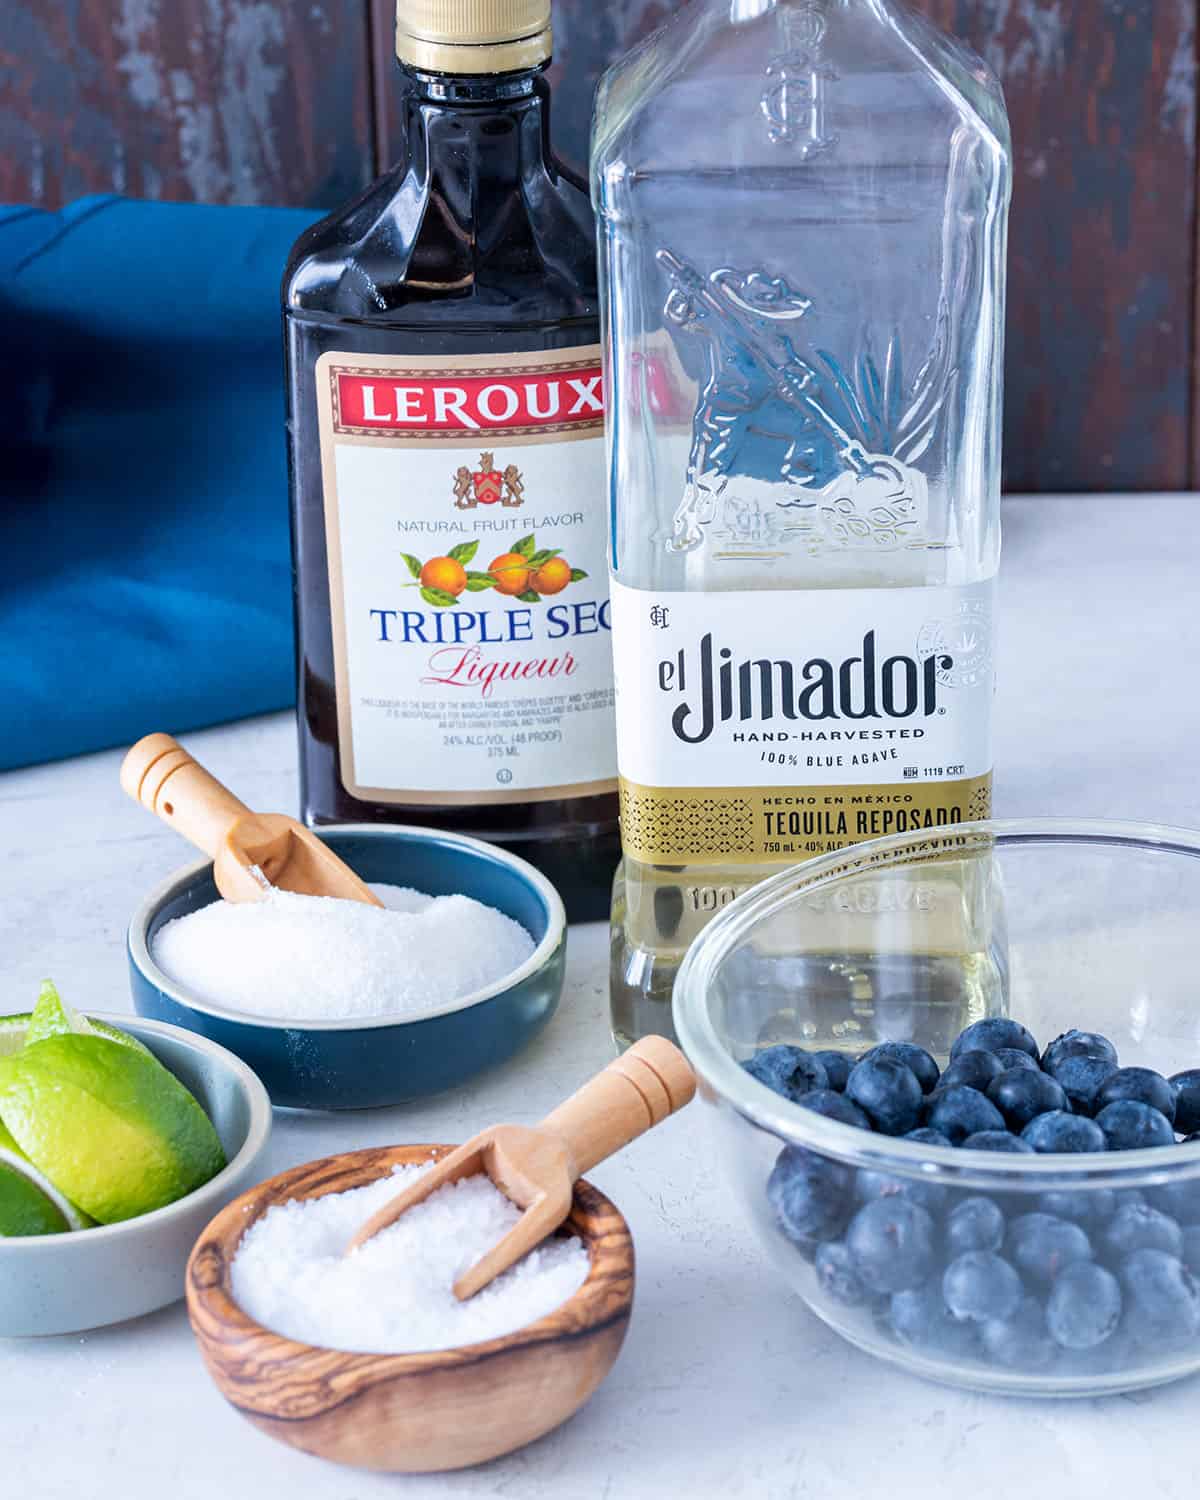 Ingredients to make a blueberry margarita with tequila, triple sec, blueberries, and lime juice.